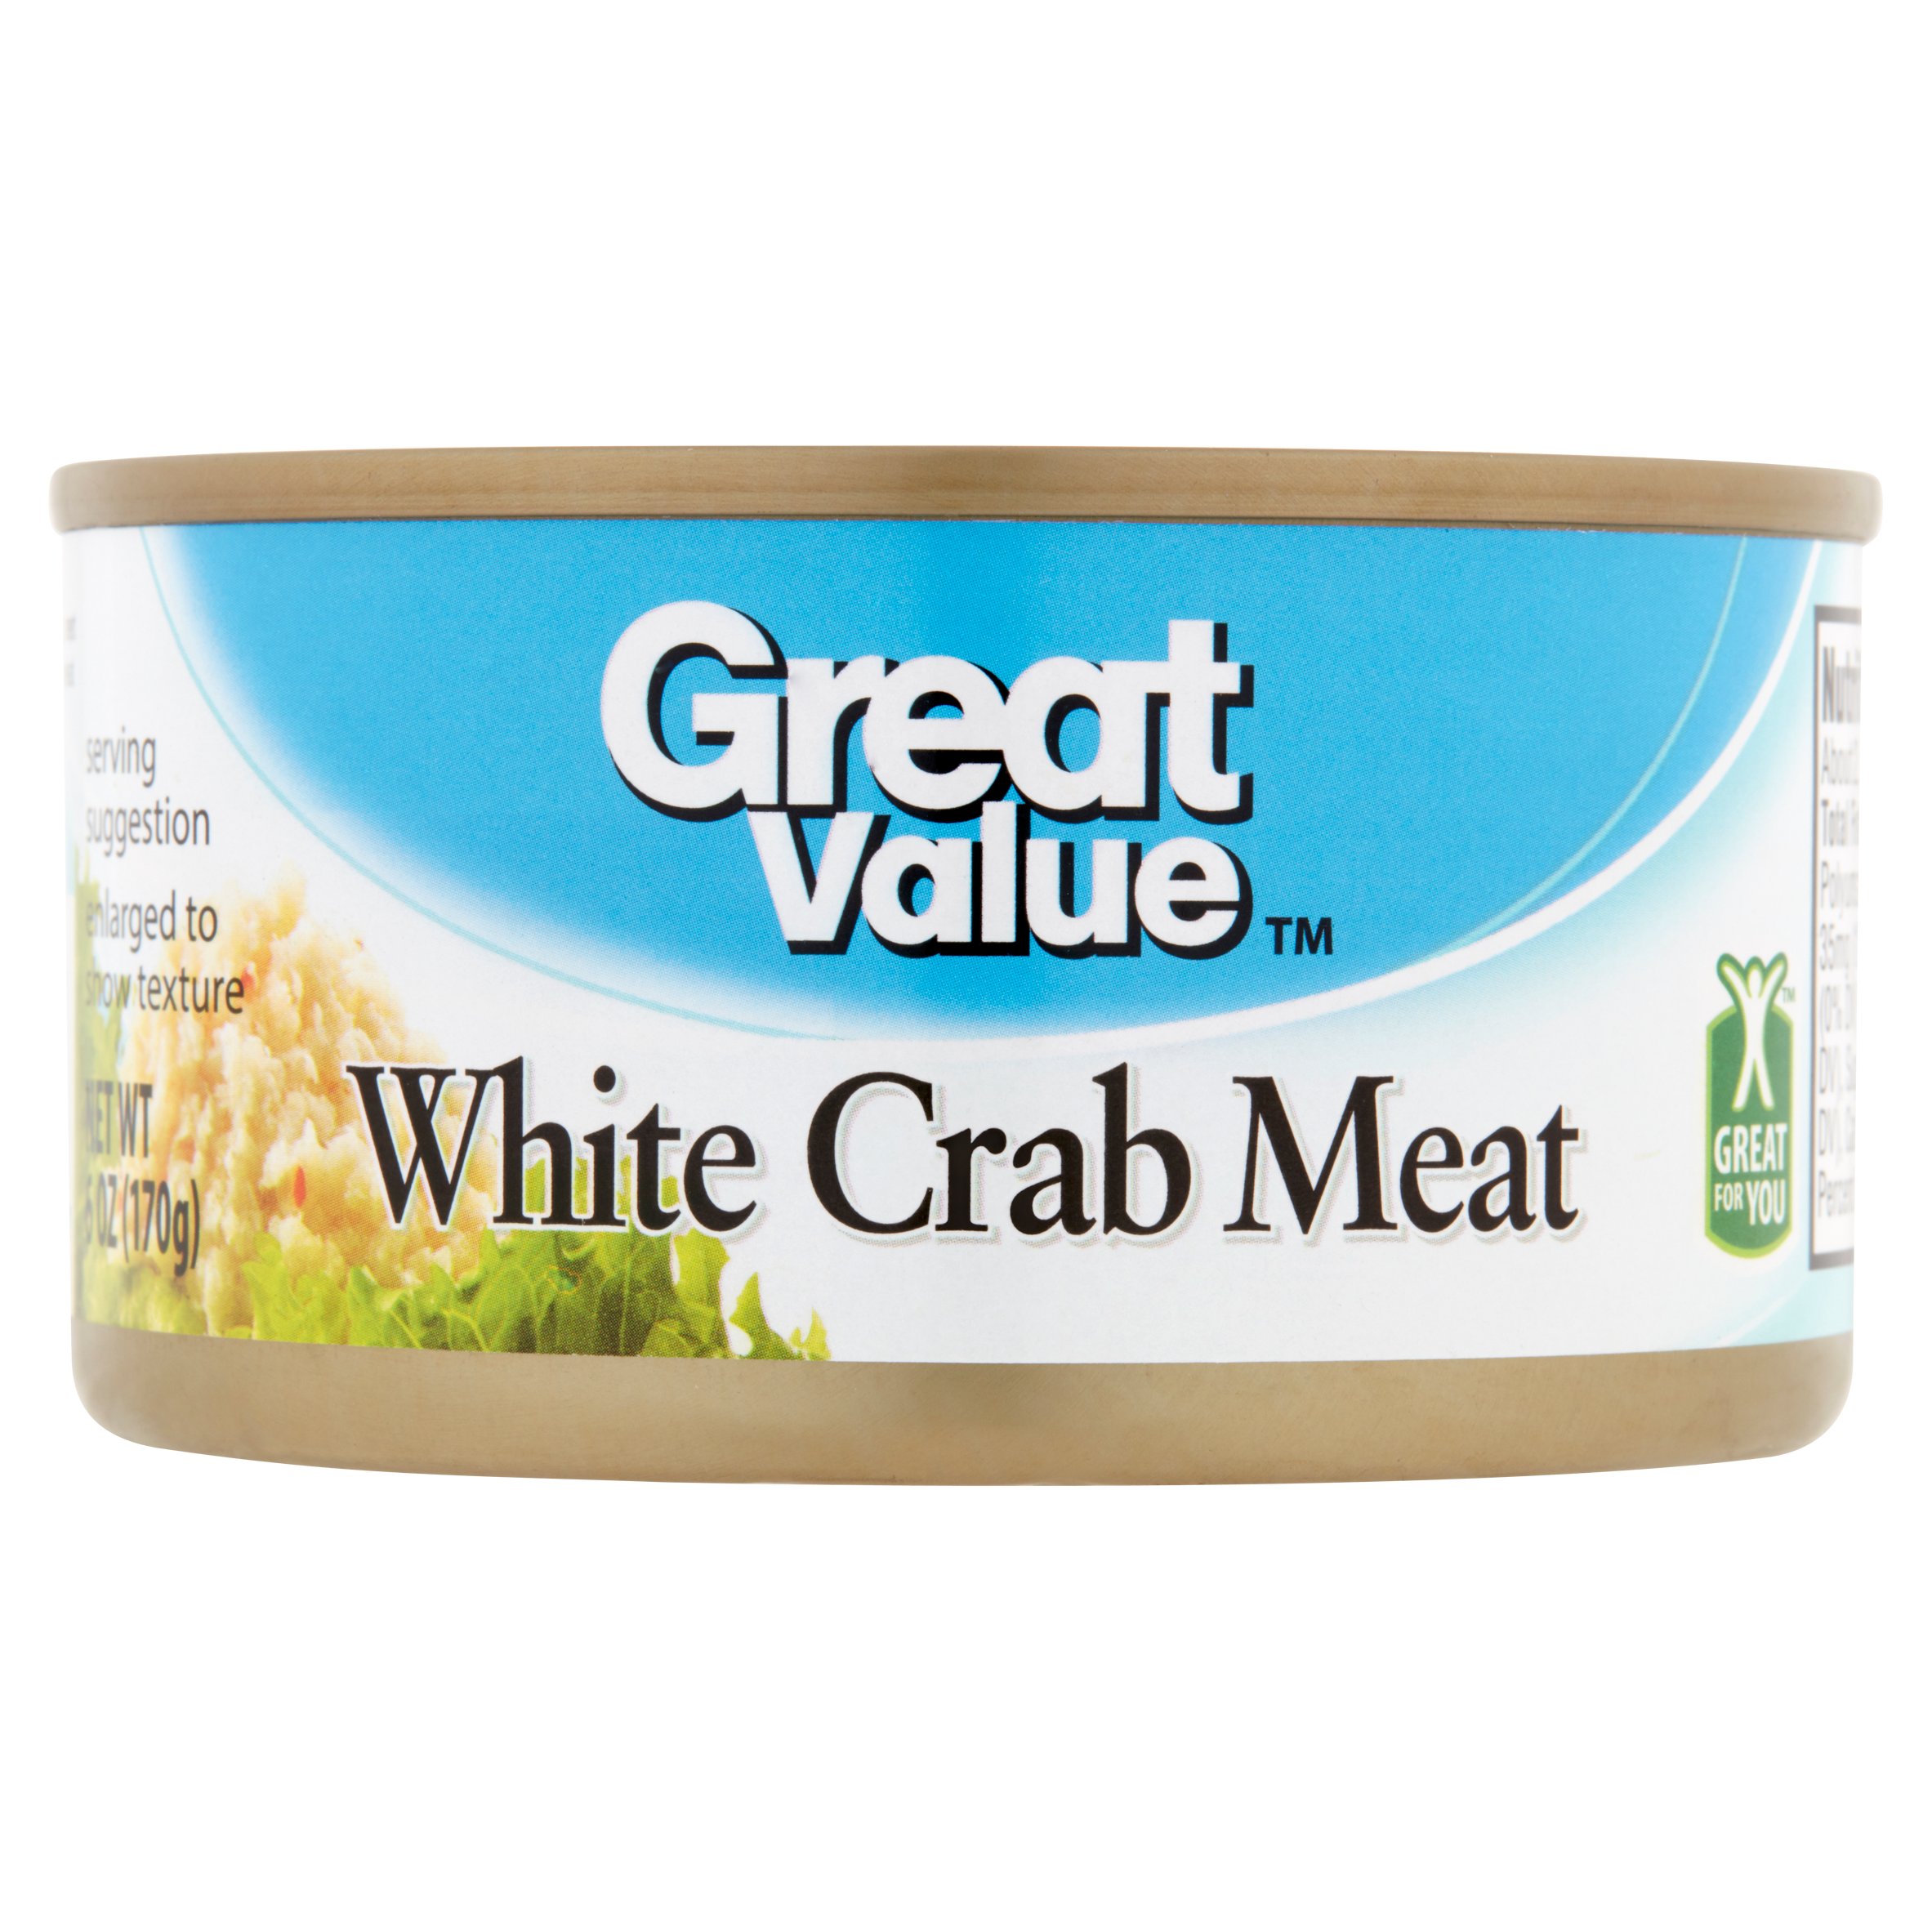 Great Value White Crab Meat, 6 Oz